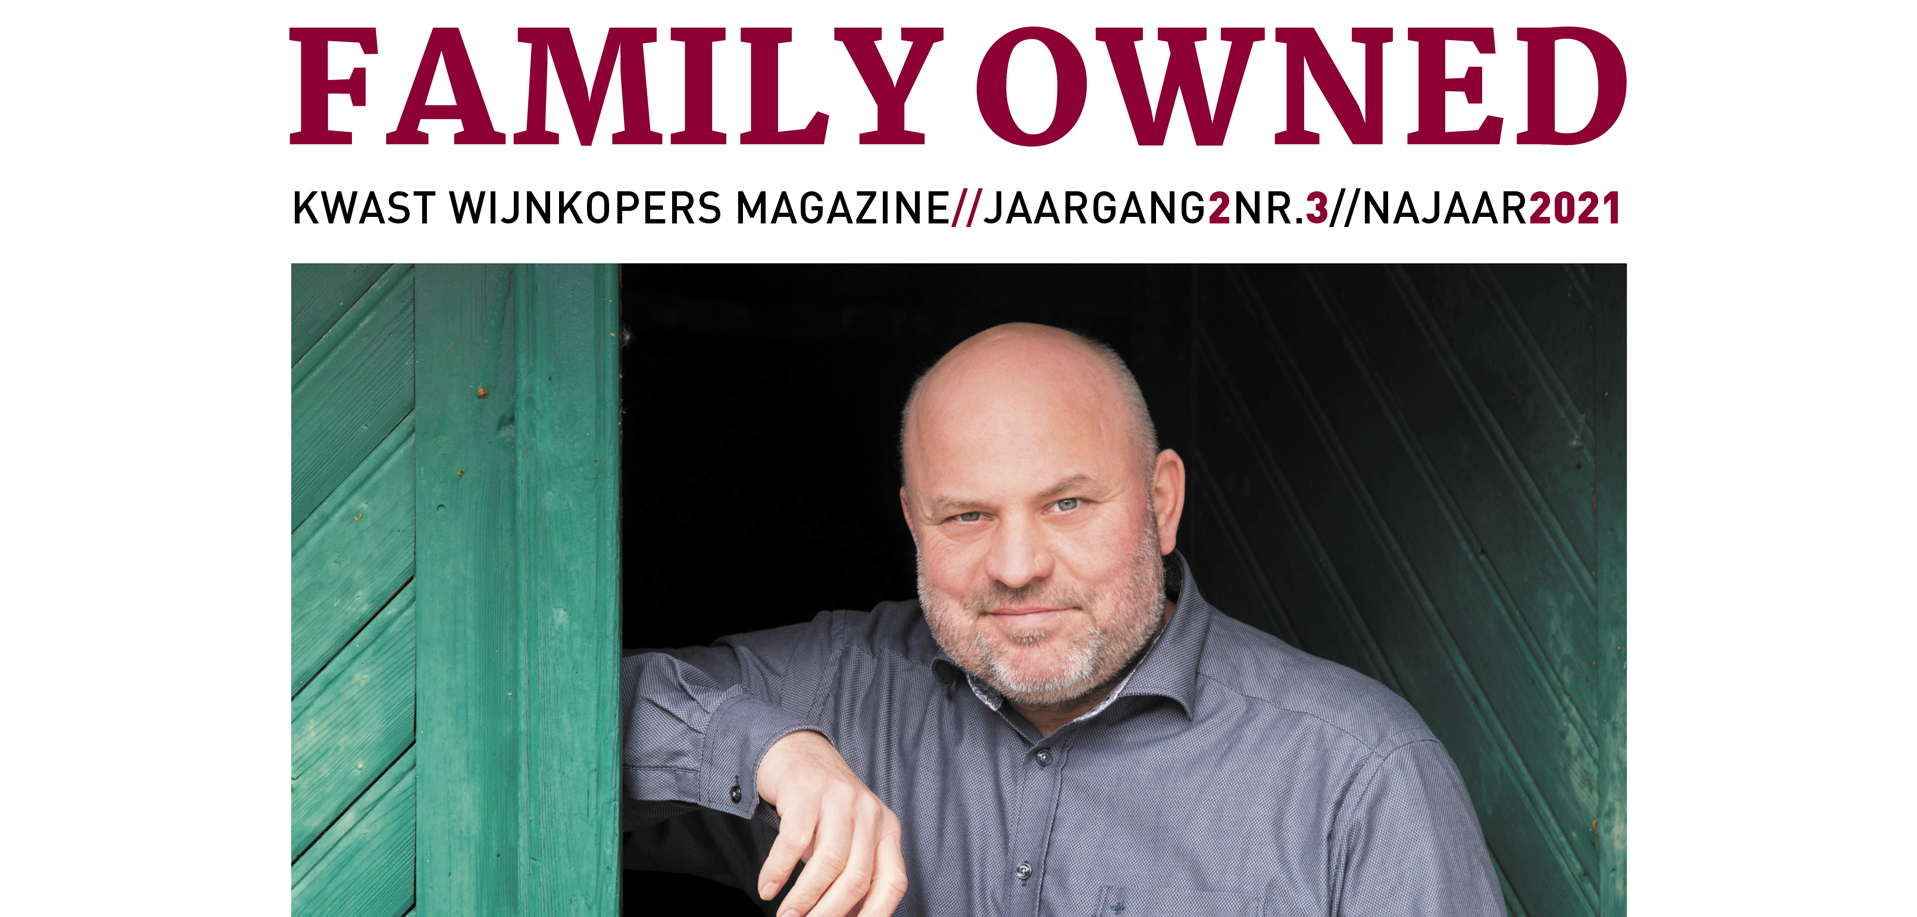 Family Owned Magazine 20213 uitgelicht